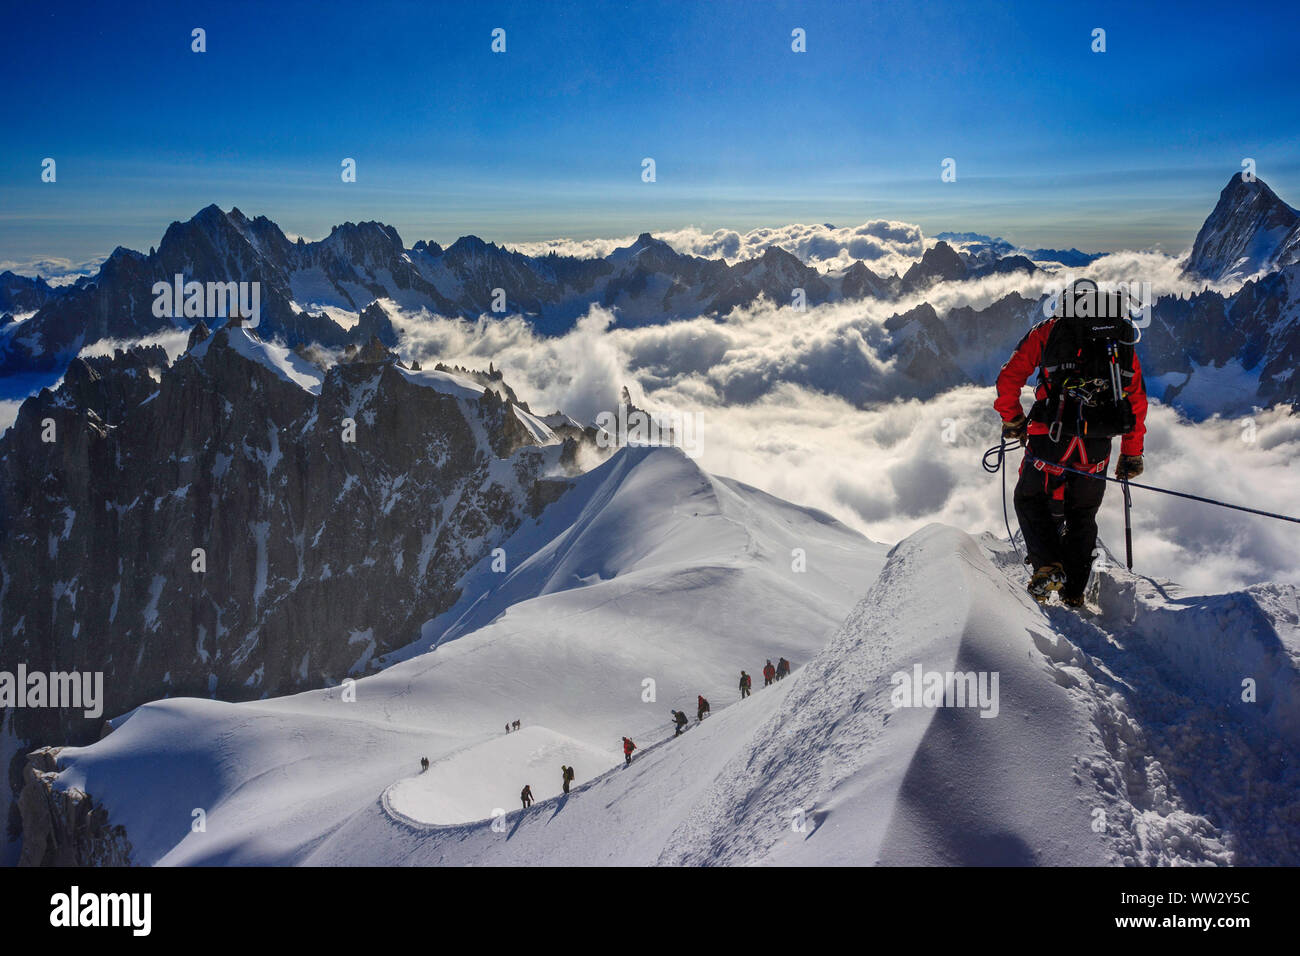 Mountain climbers descending from the Aiguille du Midi (Mount Blanc) Stock Photo